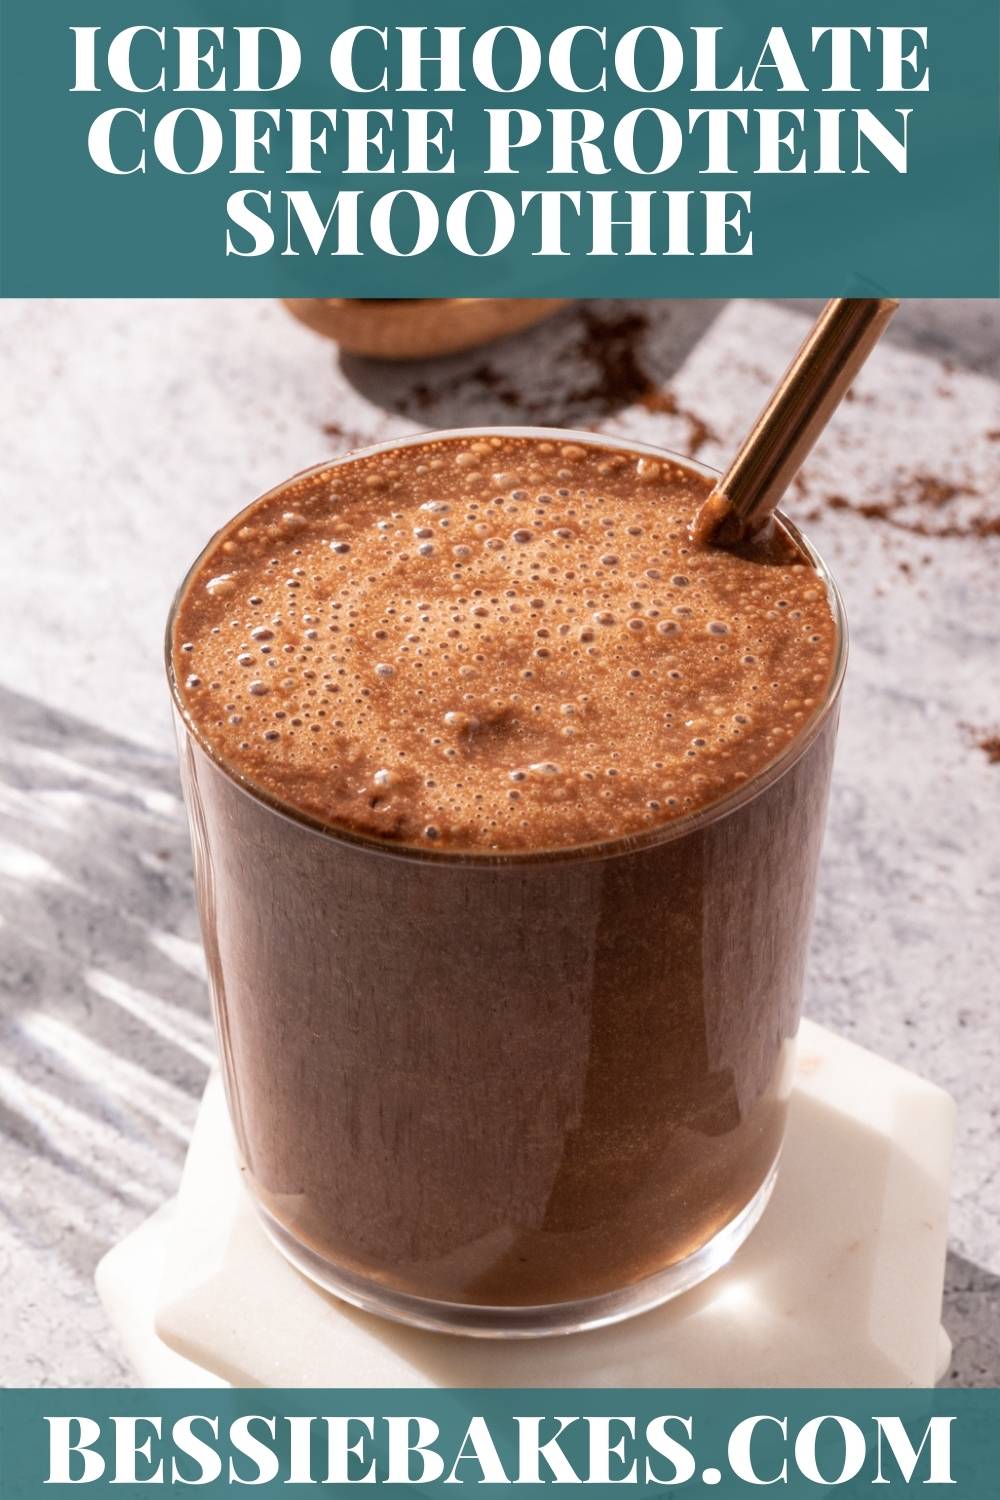 Iced Chocolate Coffee smoothie in a glass with foam on top via @bessiebakes